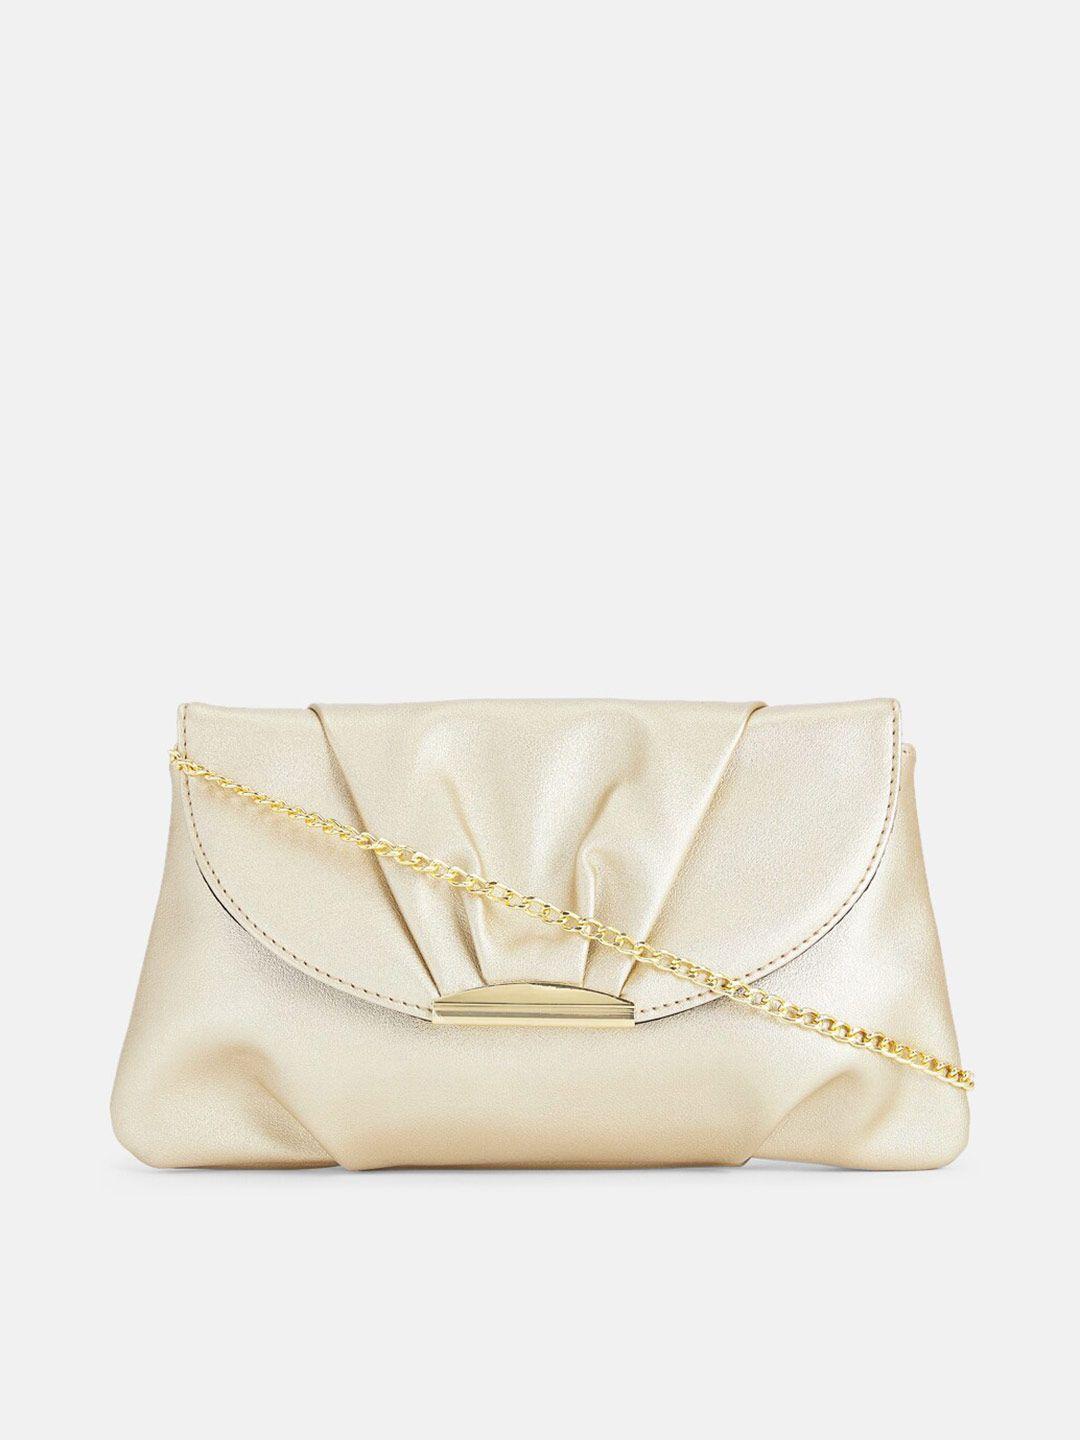 forever glam by pantaloons gold-toned purse clutch